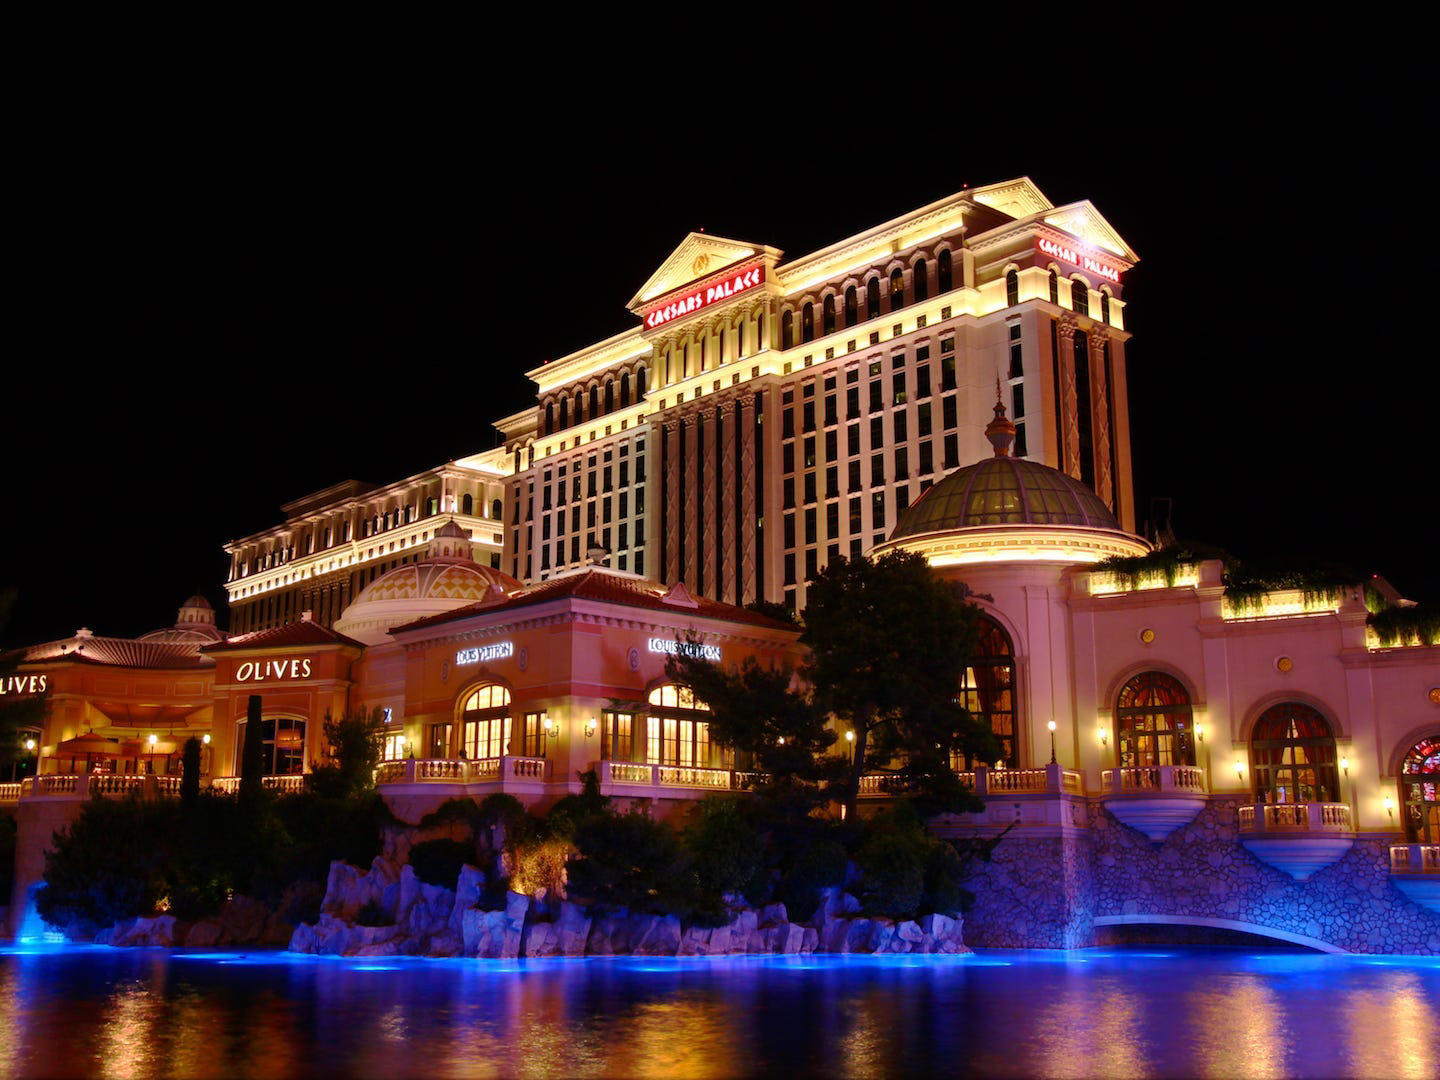 Caesars Palace and MGM Grand are among 7 Las Vegas hotels with bed bugs